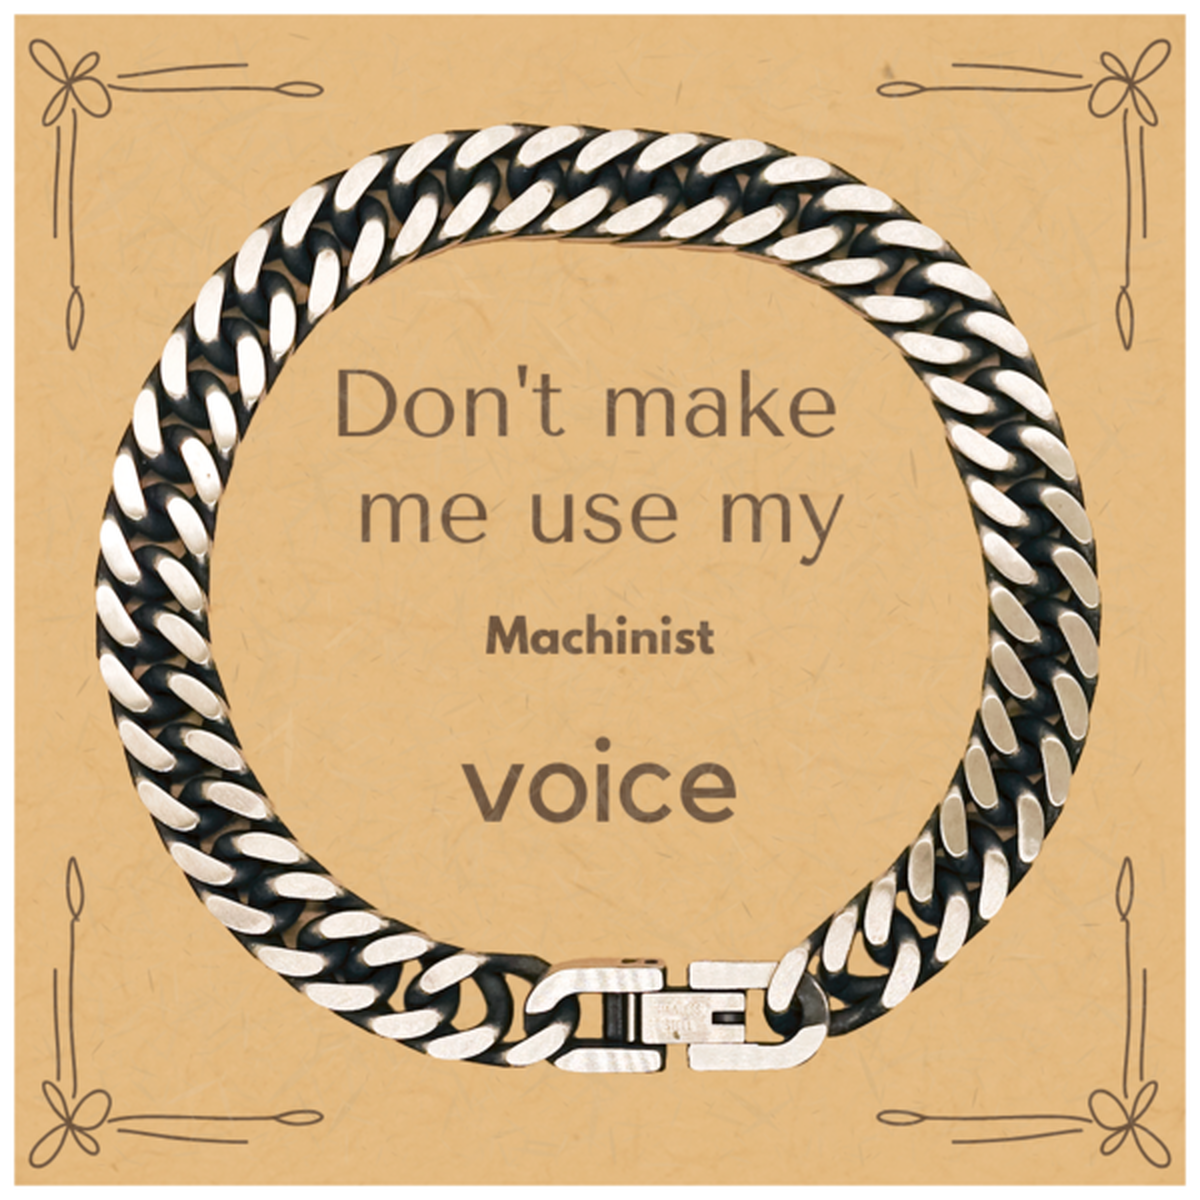 Don't make me use my Machinist voice, Sarcasm Machinist Card Gifts, Christmas Machinist Cuban Link Chain Bracelet Birthday Unique Gifts For Machinist Coworkers, Men, Women, Colleague, Friends